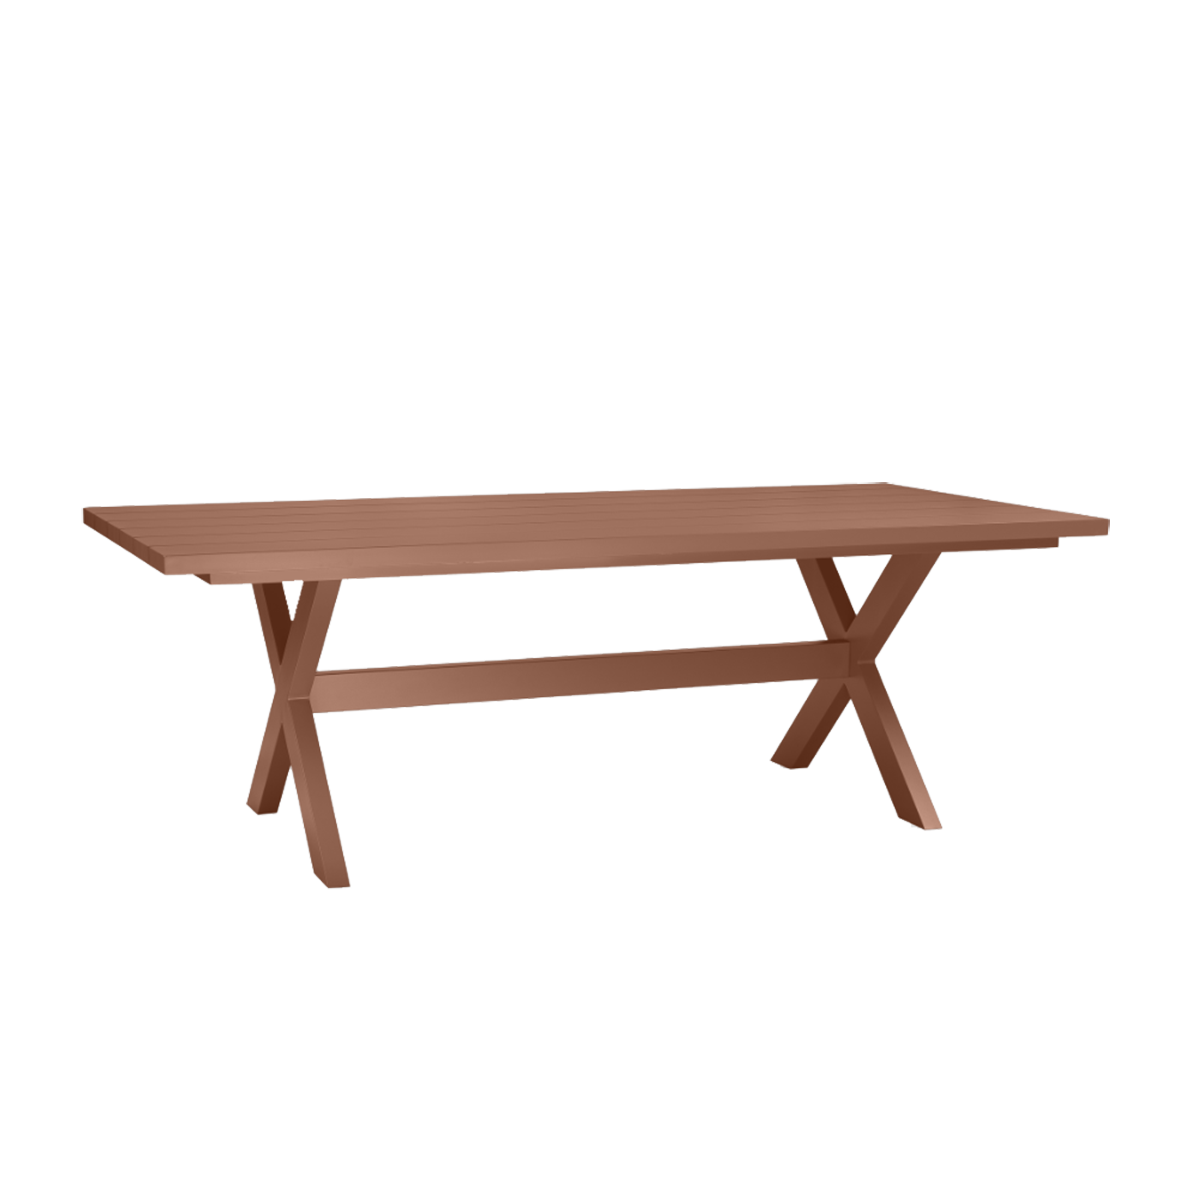 DELTA DINING TABLE OUTDOOR